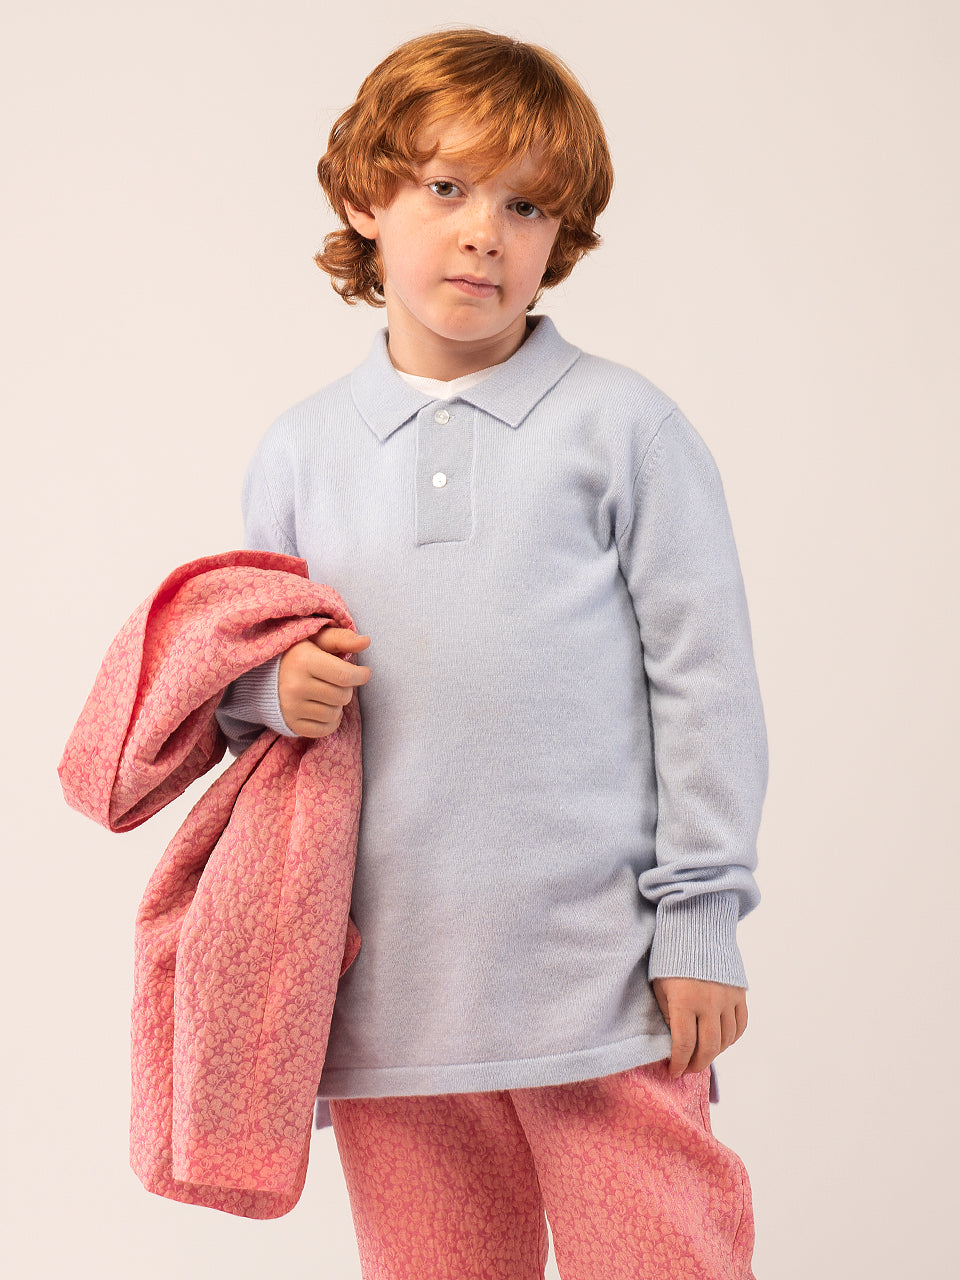 Kids Polo Sweater_Baby Blue